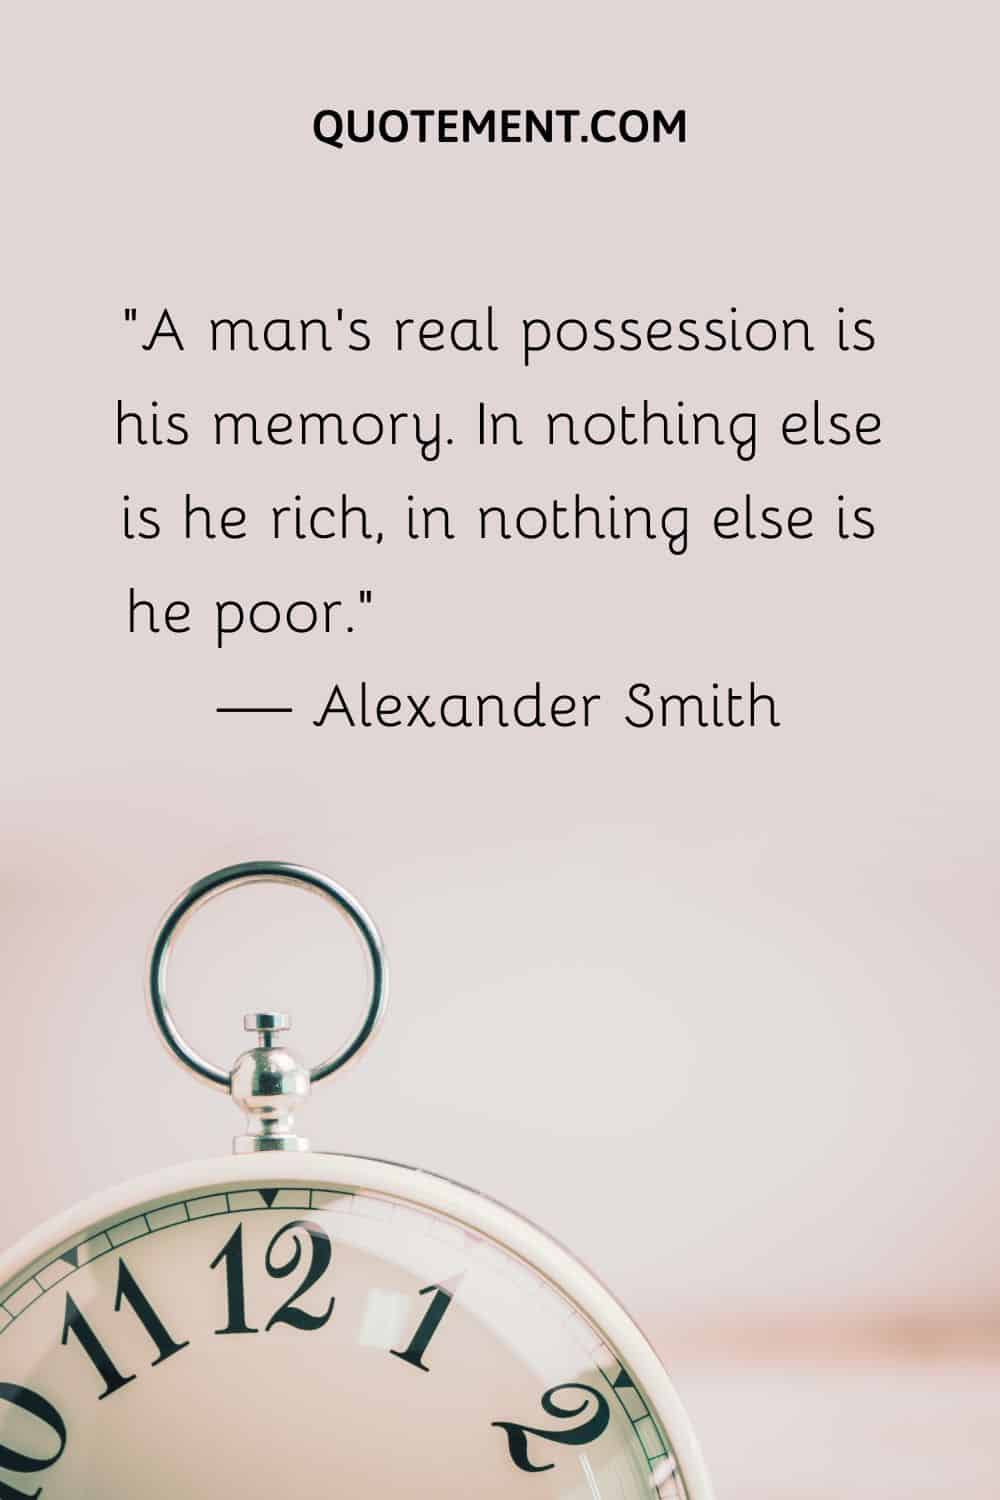 A man’s real possession is his memory